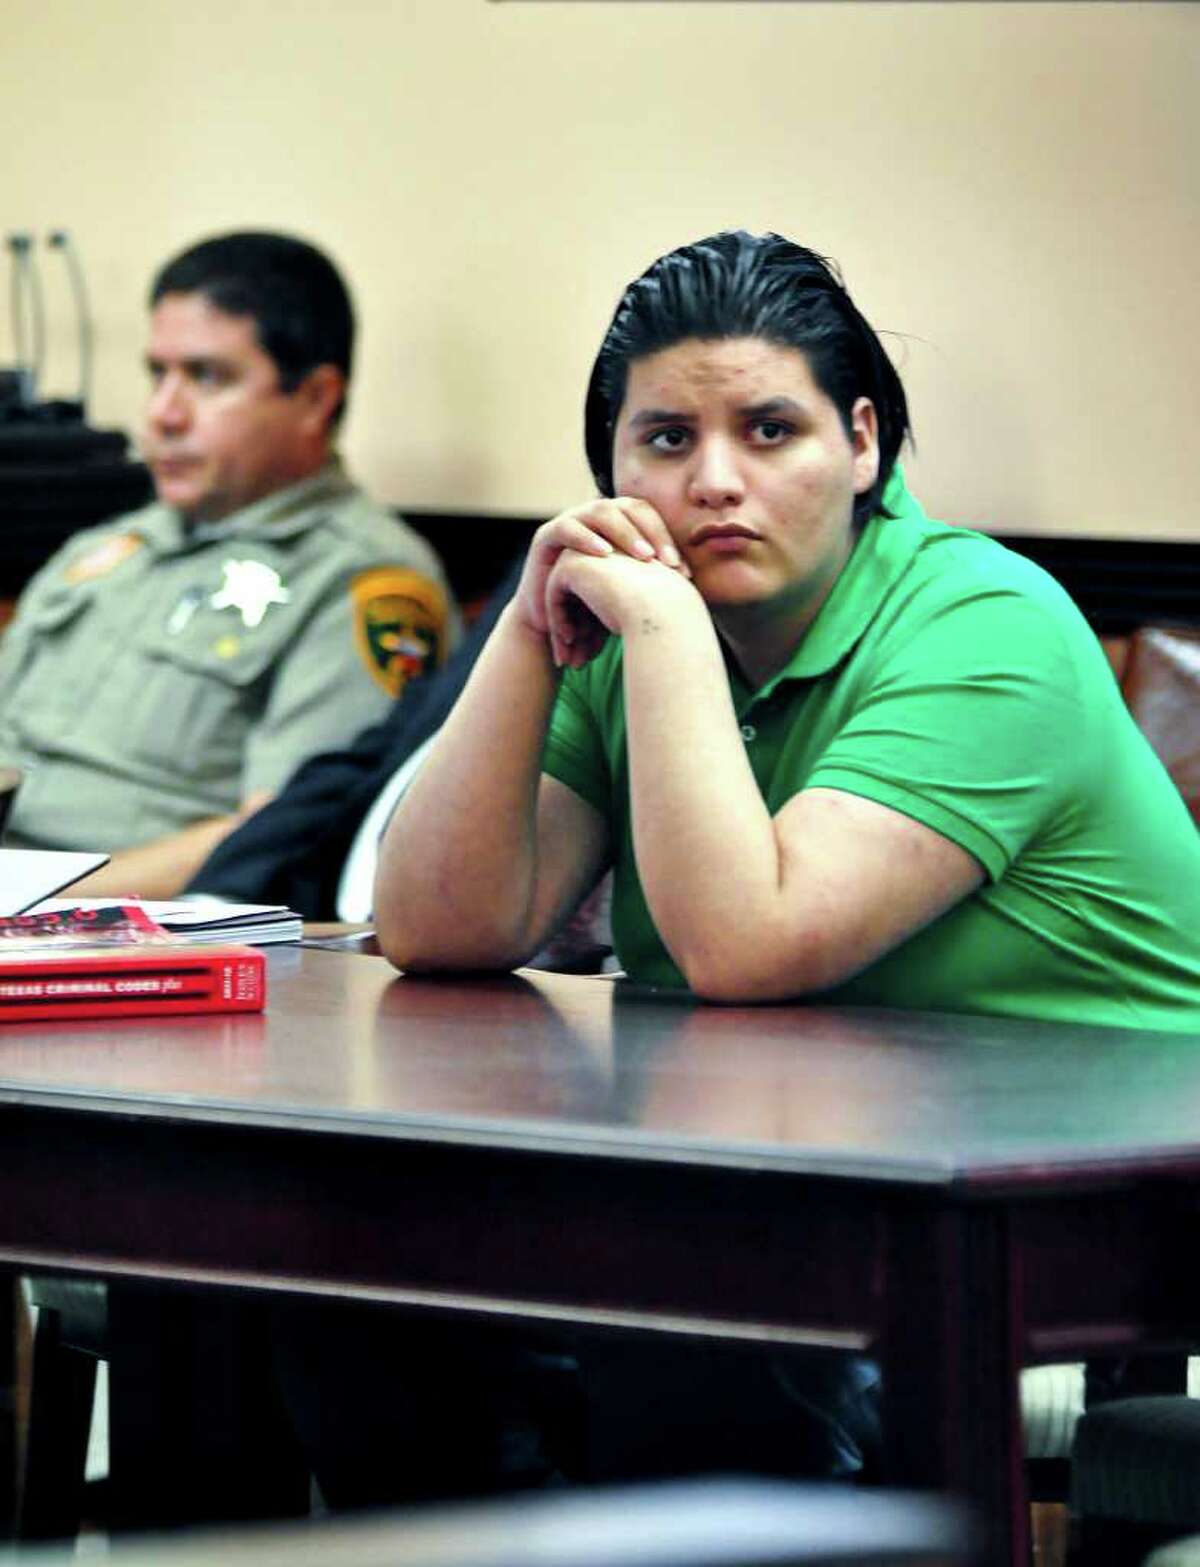 Jose "Lalo" Eduardo Arredondo on trial for the capital murder and agravated sexual assualt of two year old Katherine Cardenas, looks on as a witness approaches the stand Monday afternoon at the 49th District Court Room.